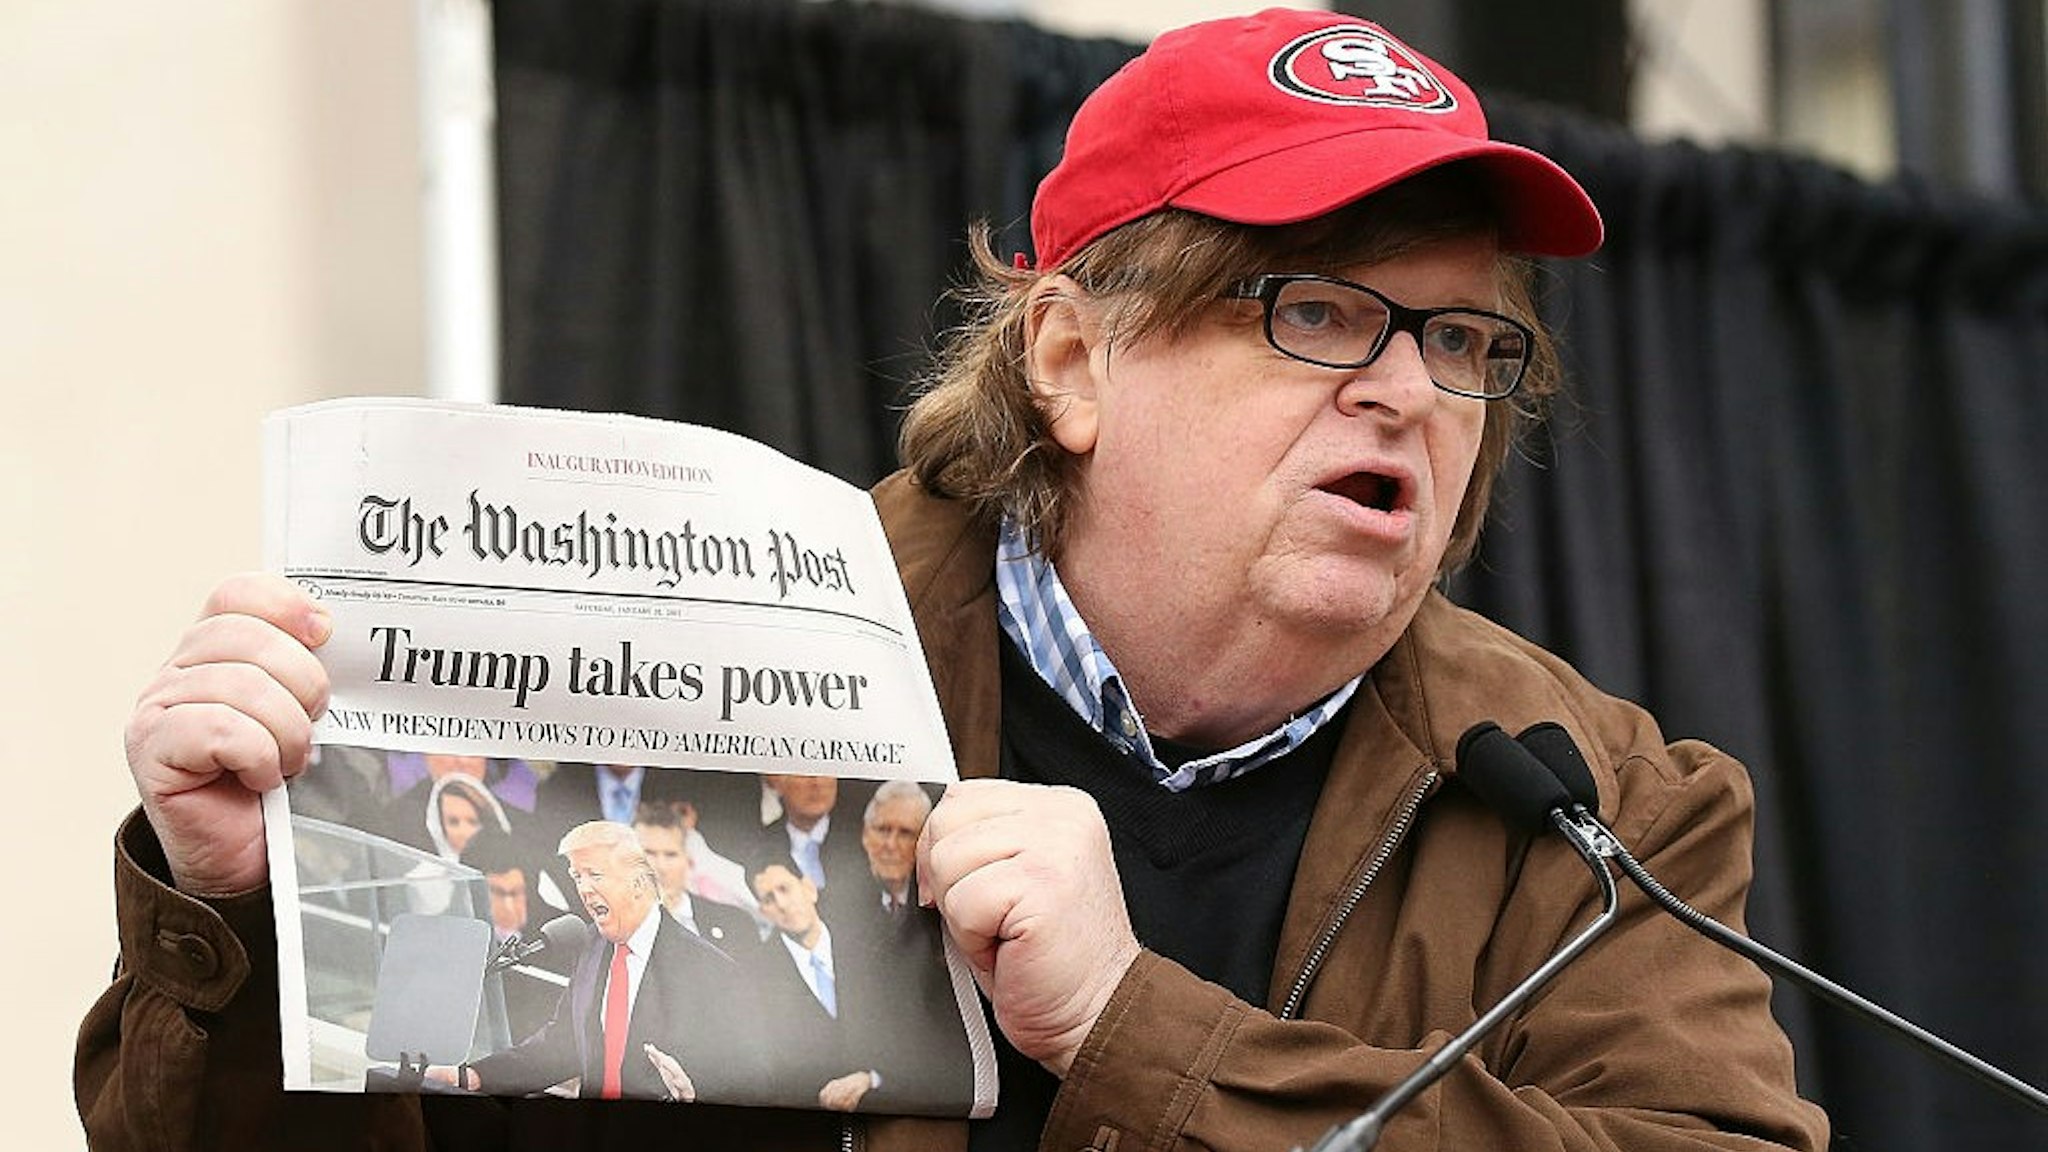 Michael Moore speaks at the rally at the Women's March on Washington on January 21, 2017 in Washington, DC.